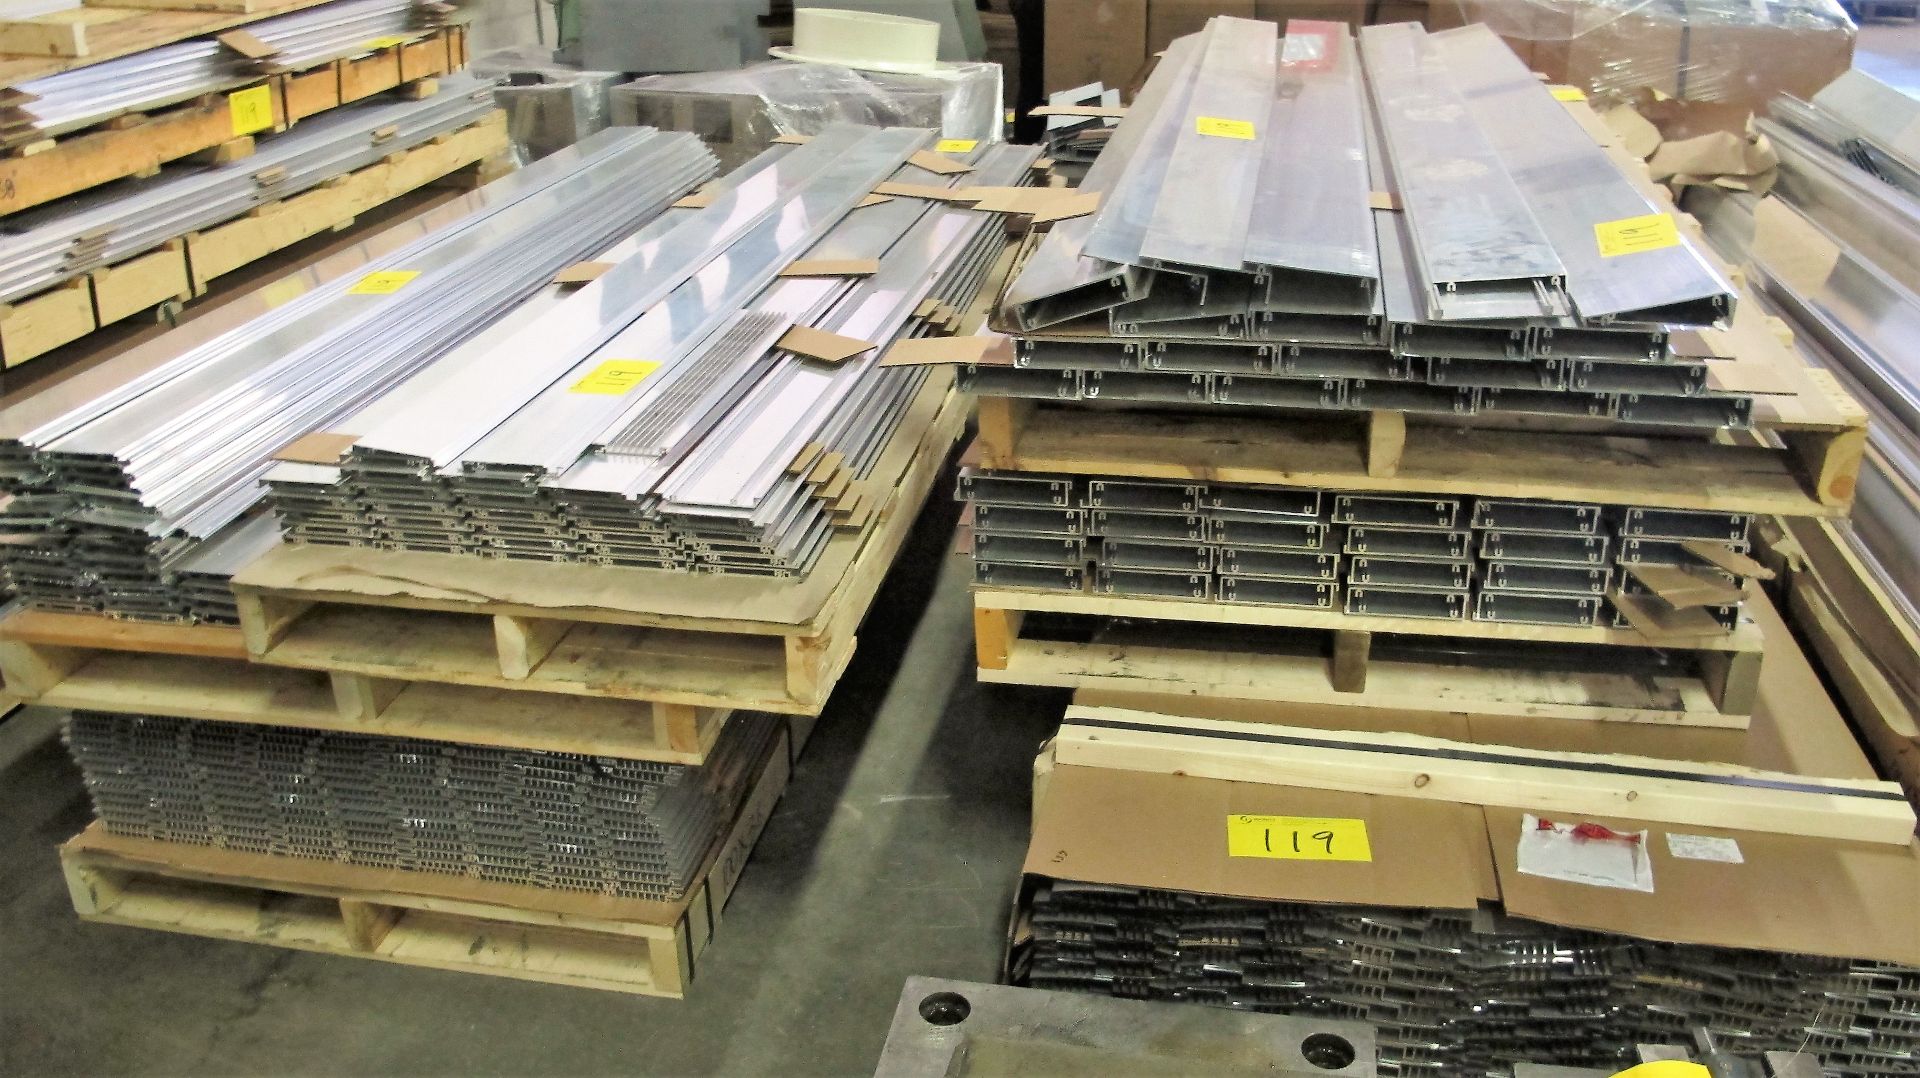 LARGE QTY OF ASST. ALUMINUM EXTRUSIONS, UP TO 8' LENGTH (APPROX. 12,500LBS) - Image 4 of 8